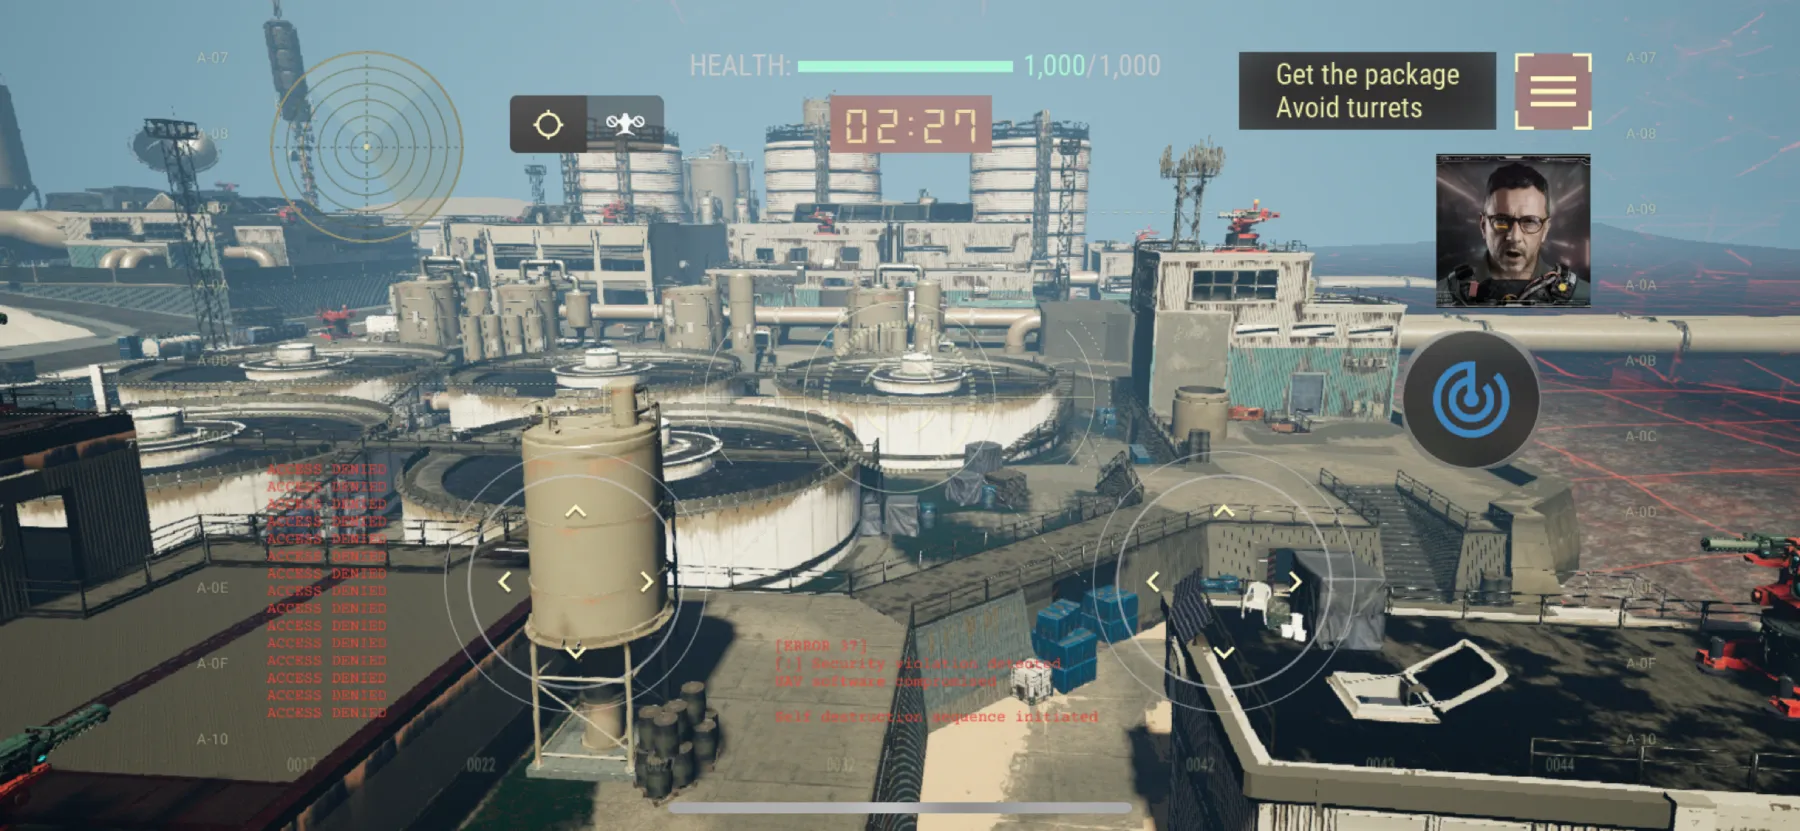 Screenshot from Technocore gameplay, showing a drone UI overlaid atop an industrial environment.